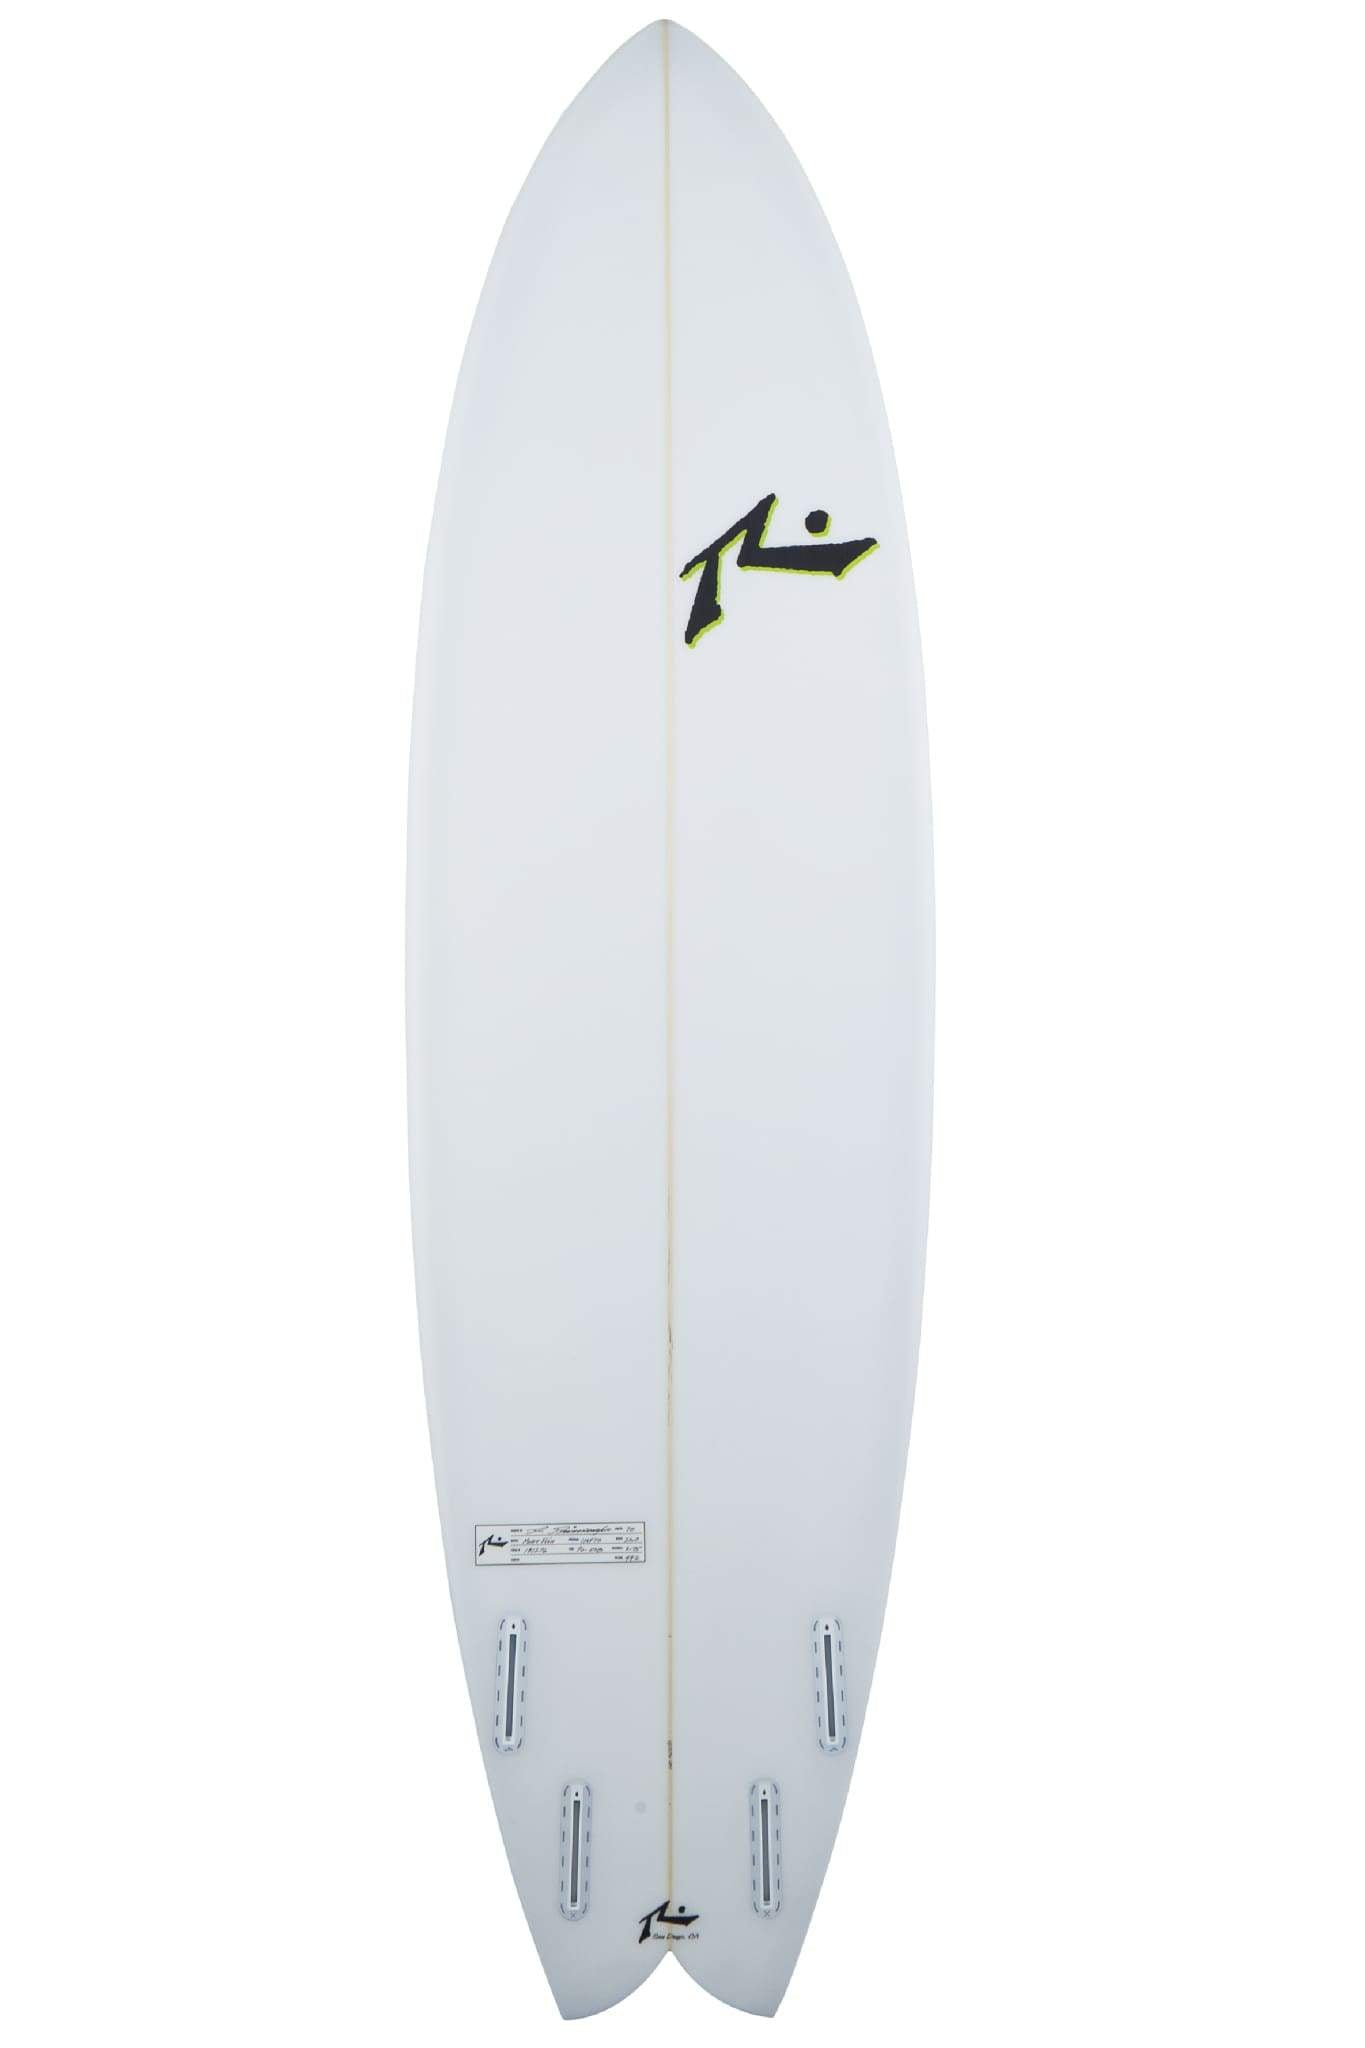 Moby Fish-Surfboards-Rusty Surfboards ME